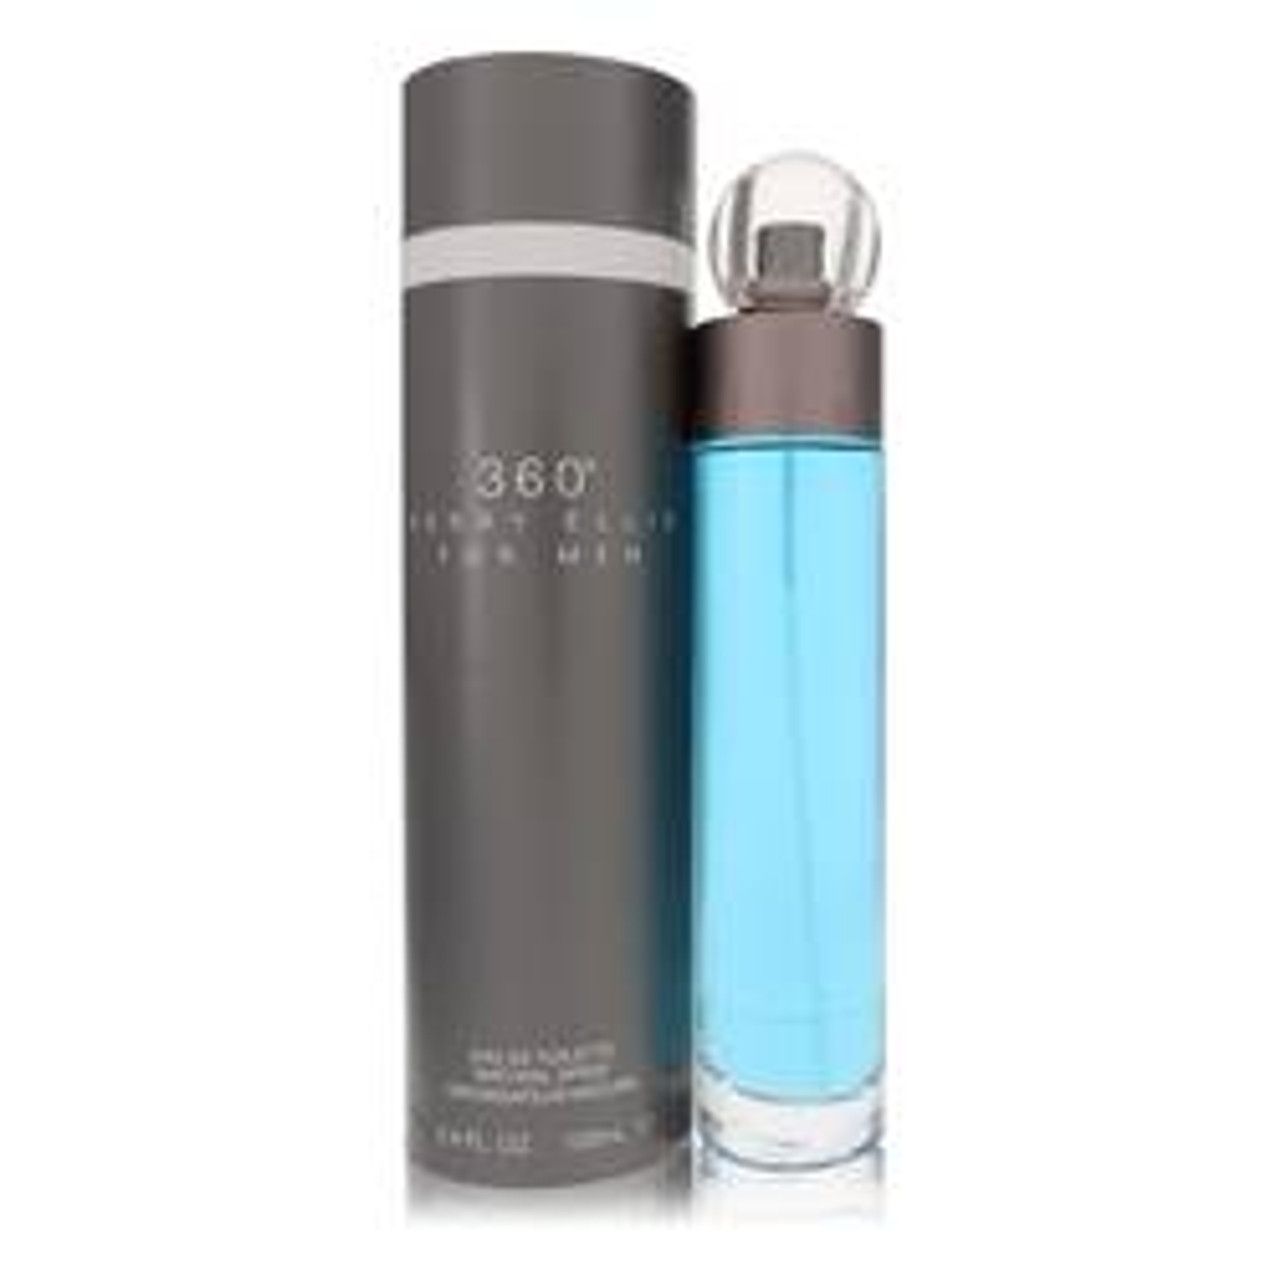 Perry Ellis 360 Cologne By Perry Ellis Eau De Toilette Spray 3.4 oz for Men - [From 75.00 - Choose pk Qty ] - *Ships from Miami